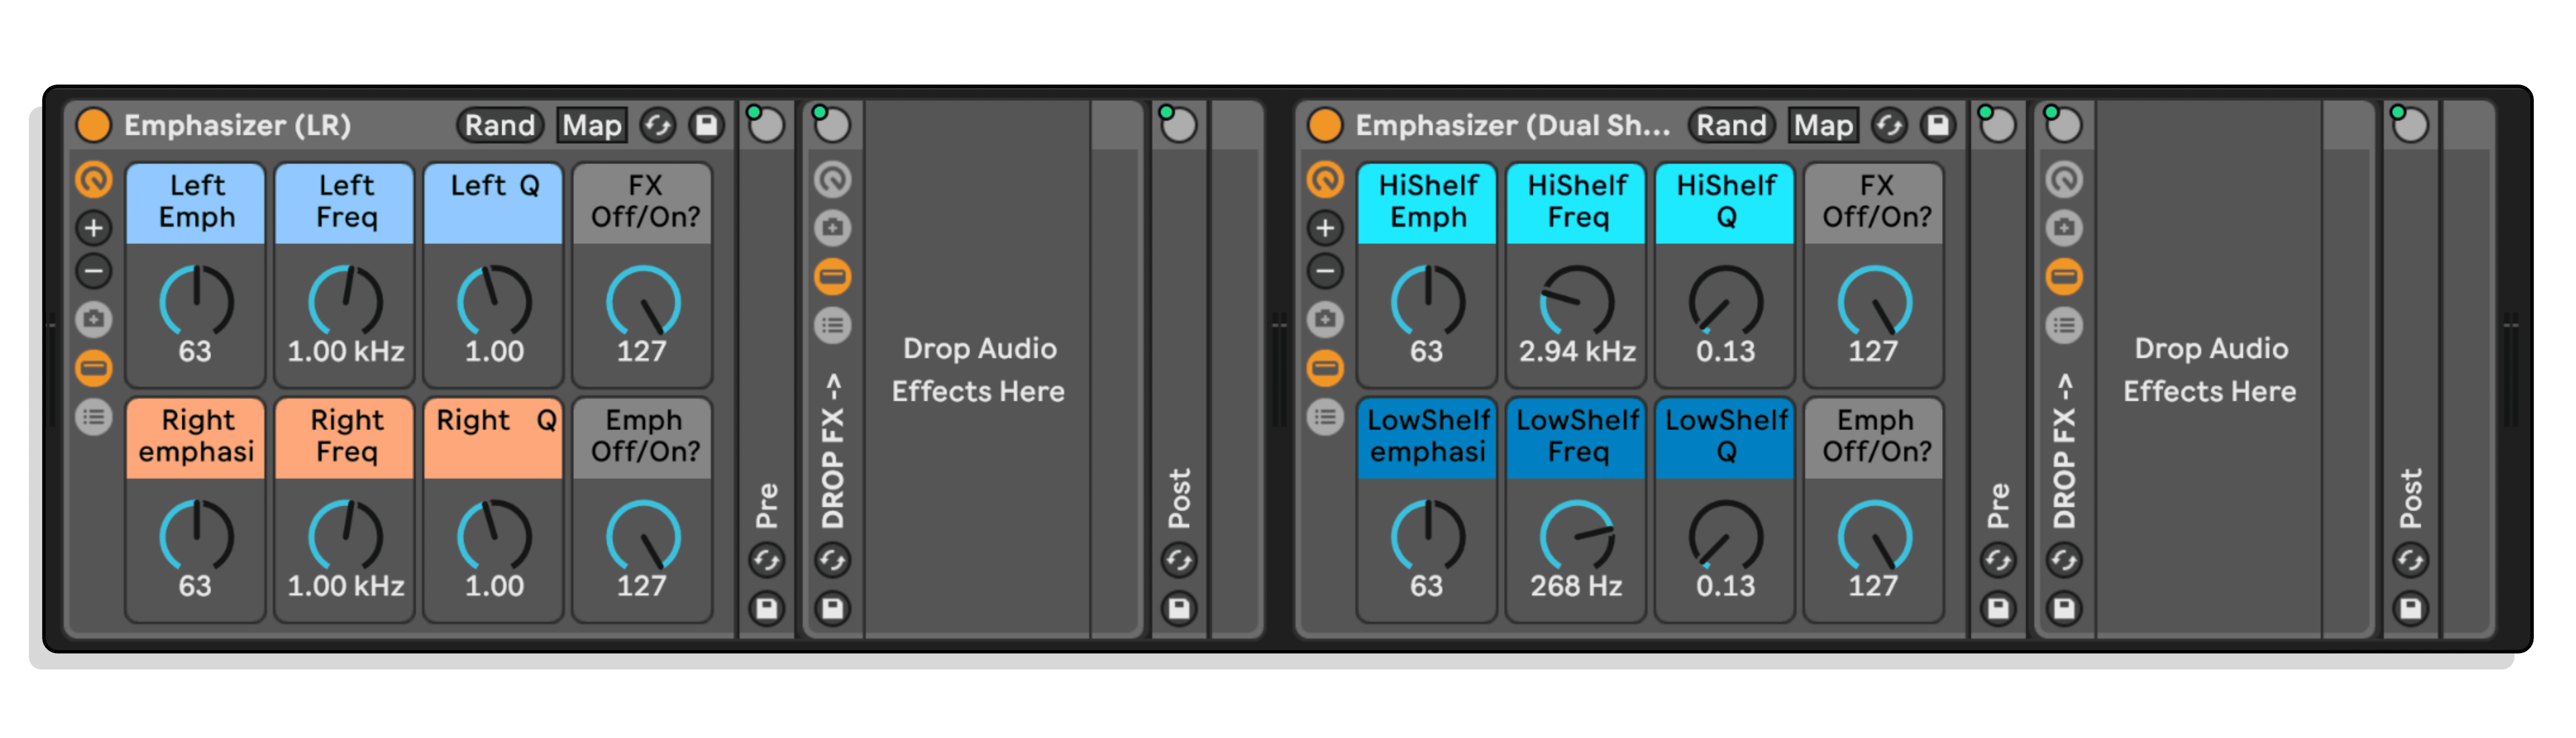 Emphasizers Ableton Live Pack by PerforModule